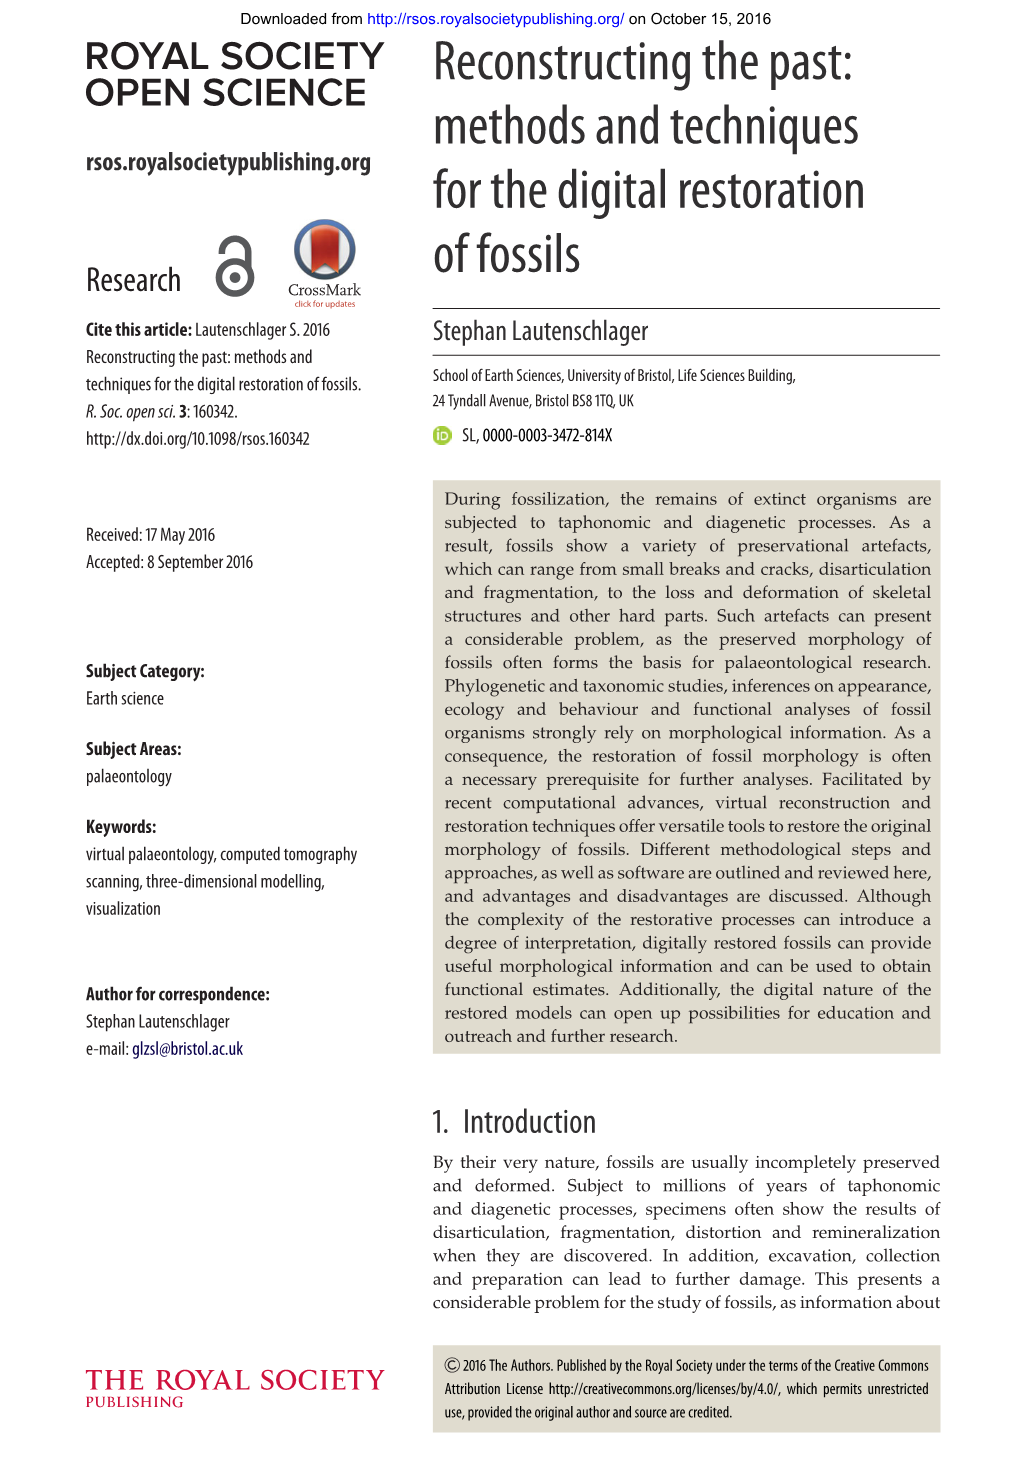 Methods and Techniques for the Digital Restoration of Fossils